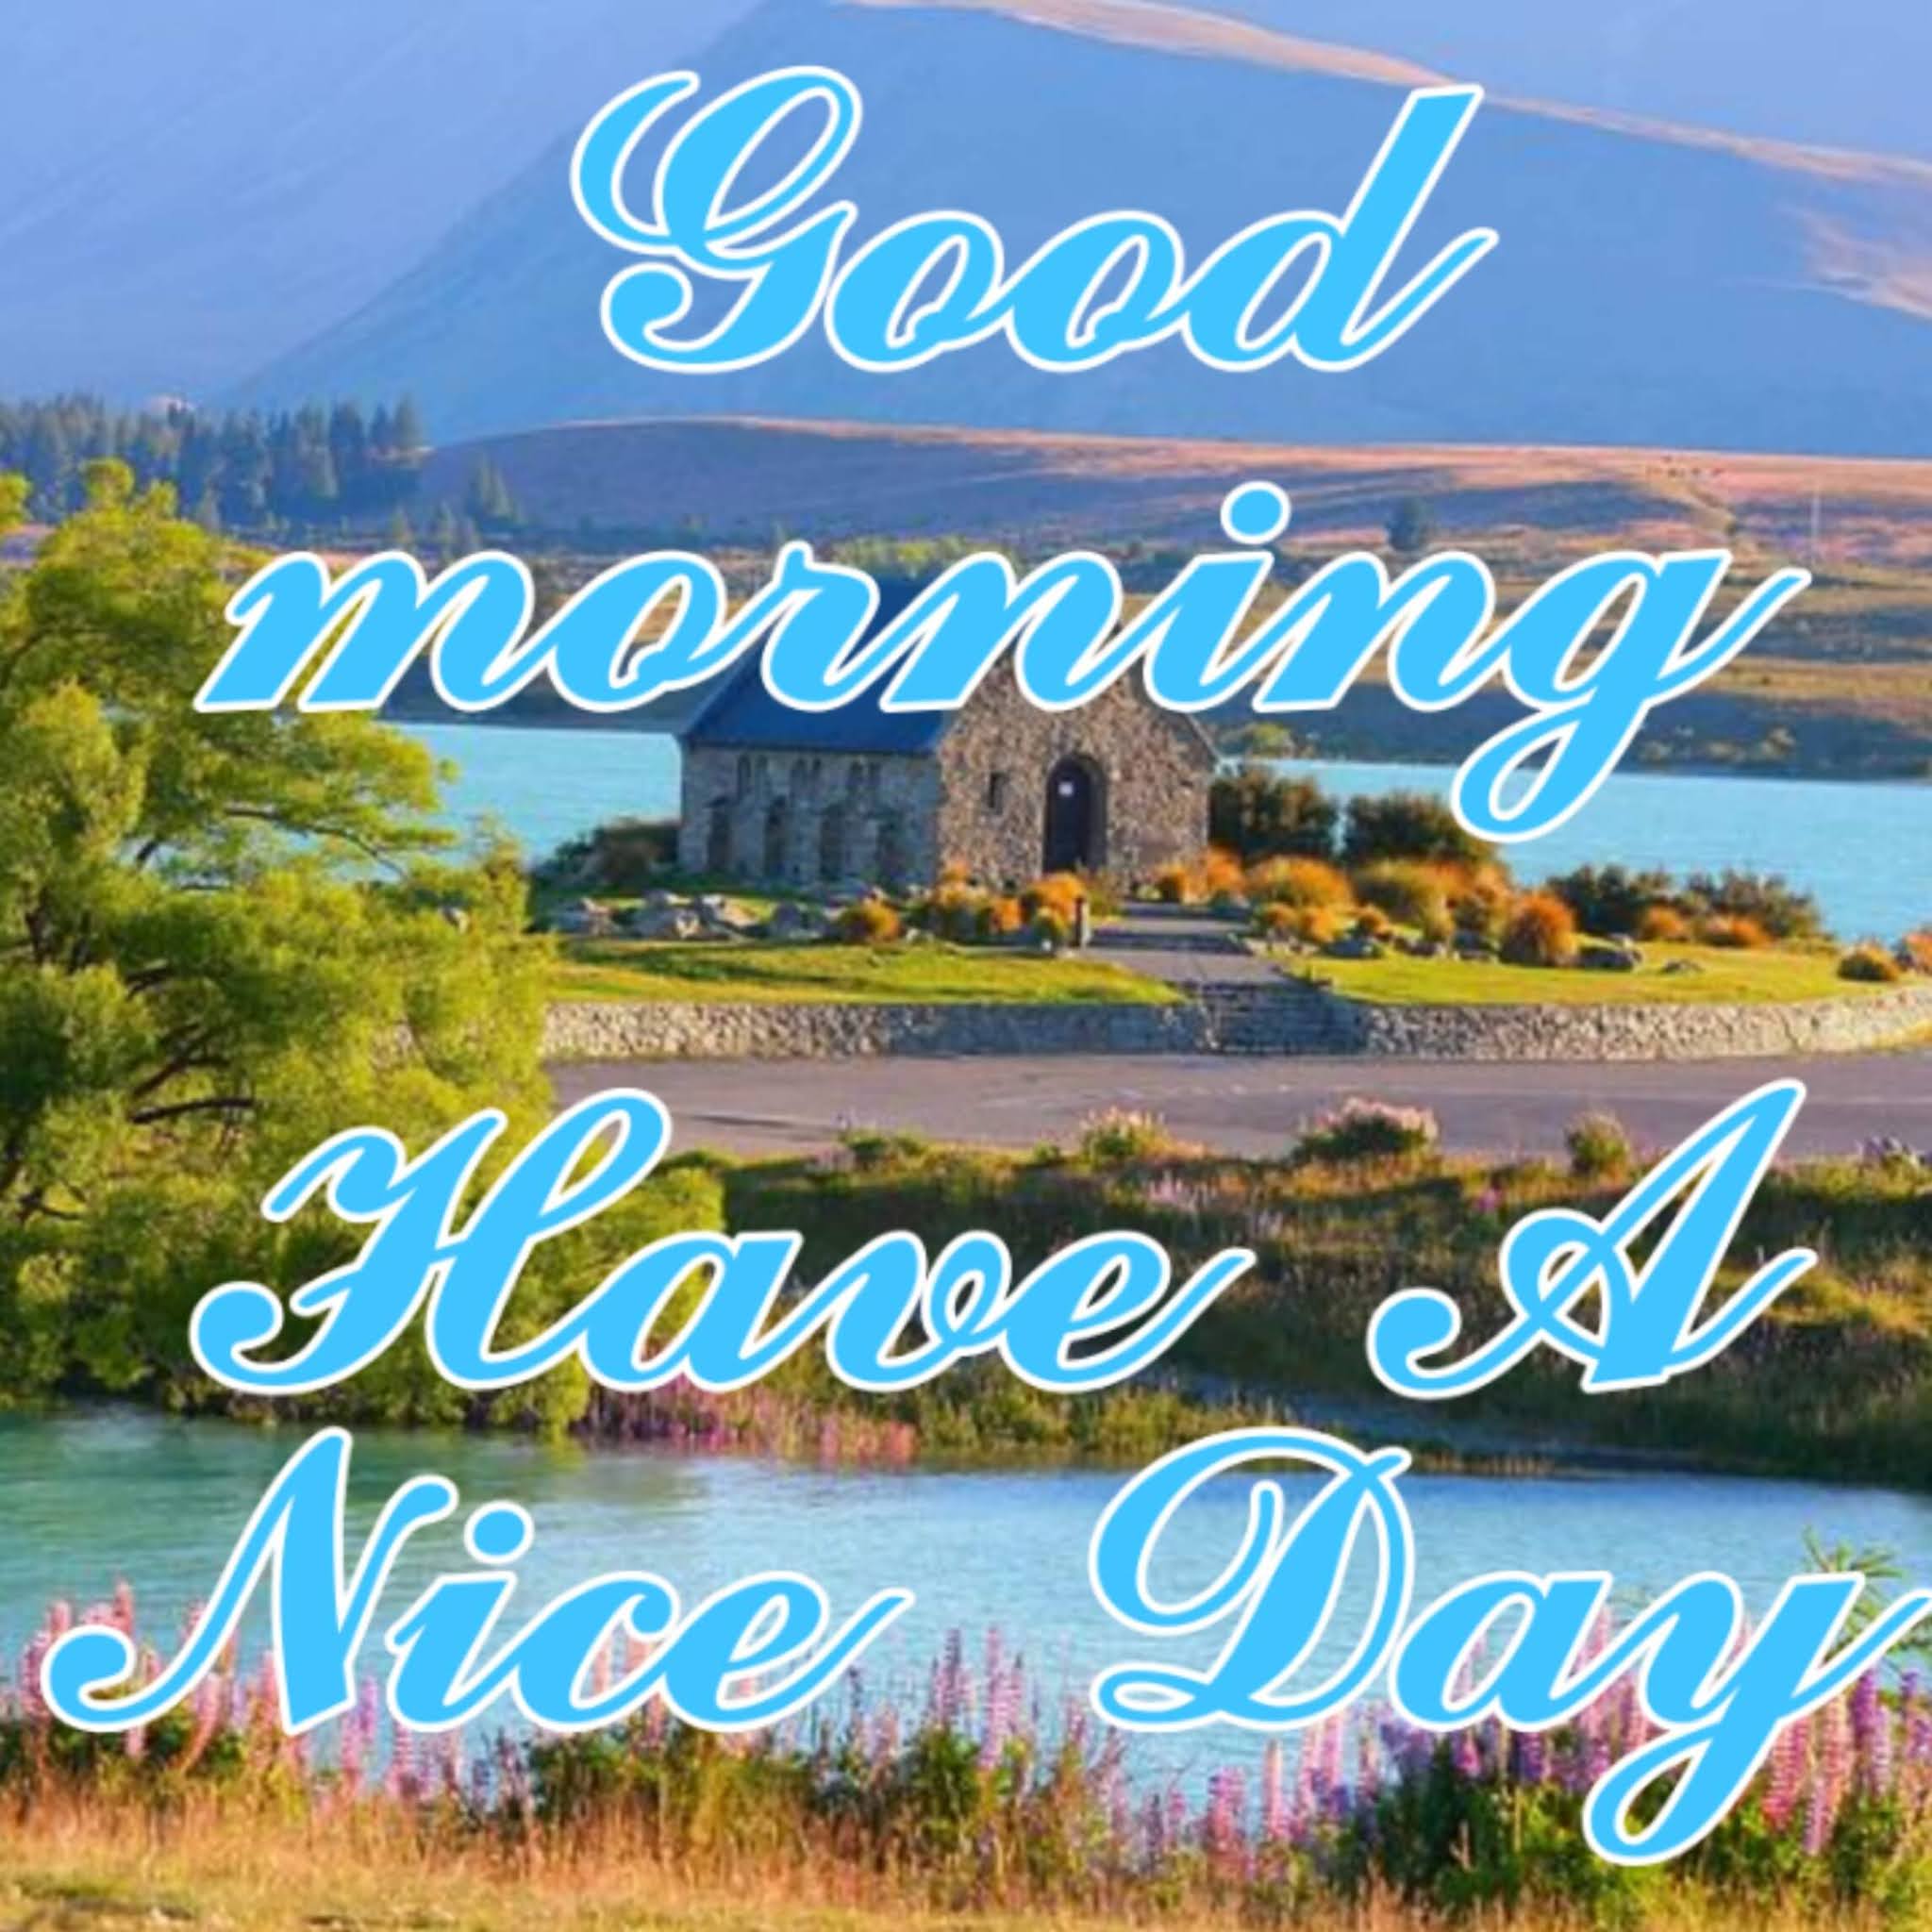 good morning have a nice day image wishes image